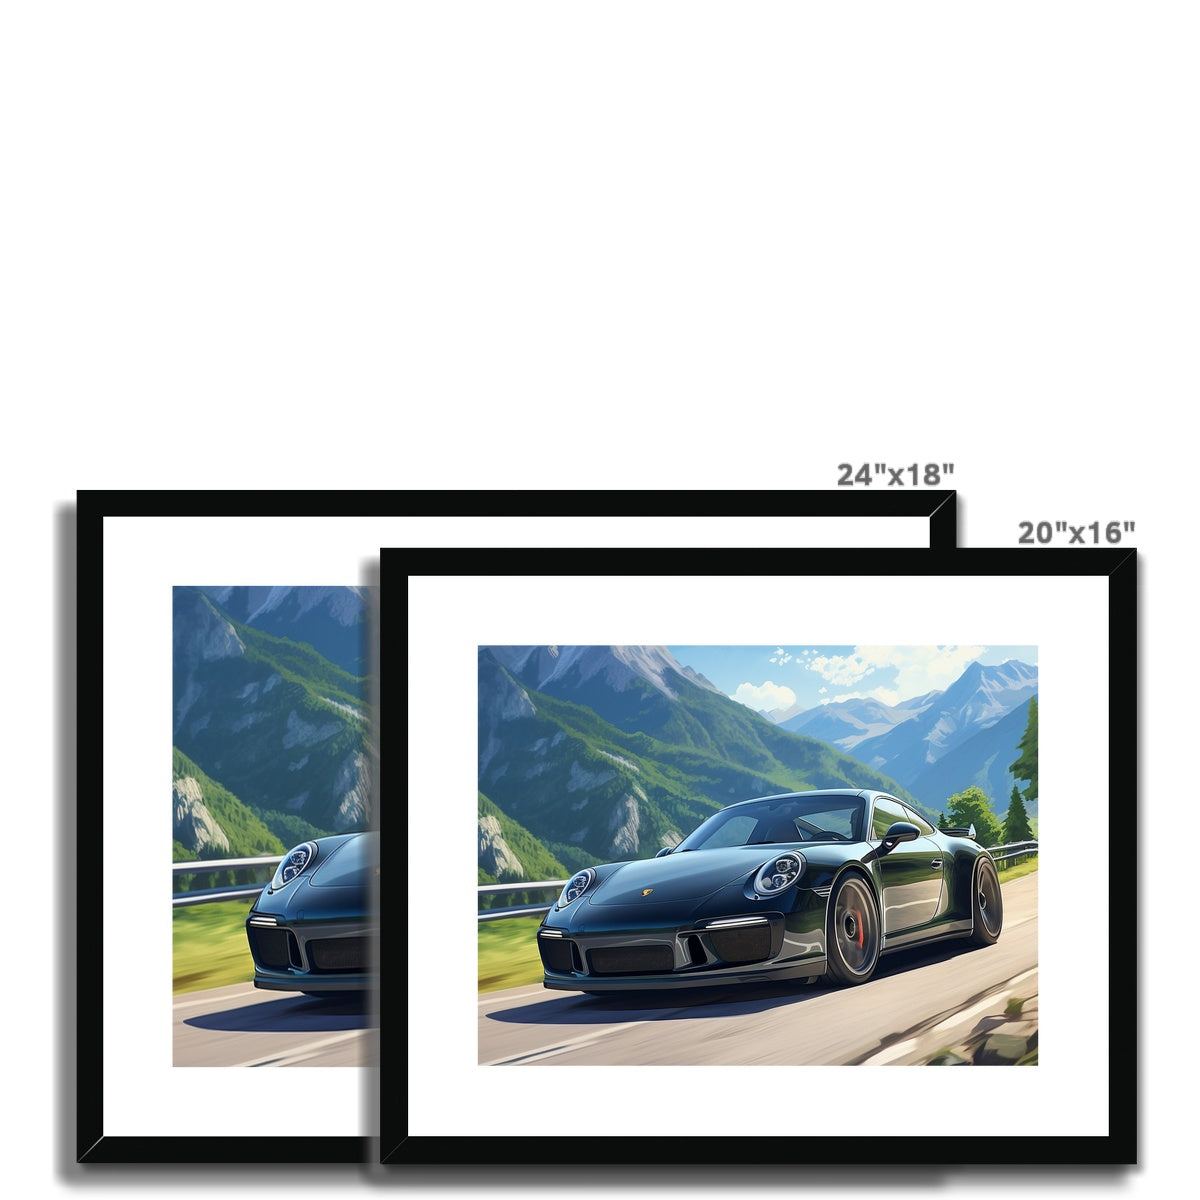 Cameron The Carrera  Framed & Mounted Print